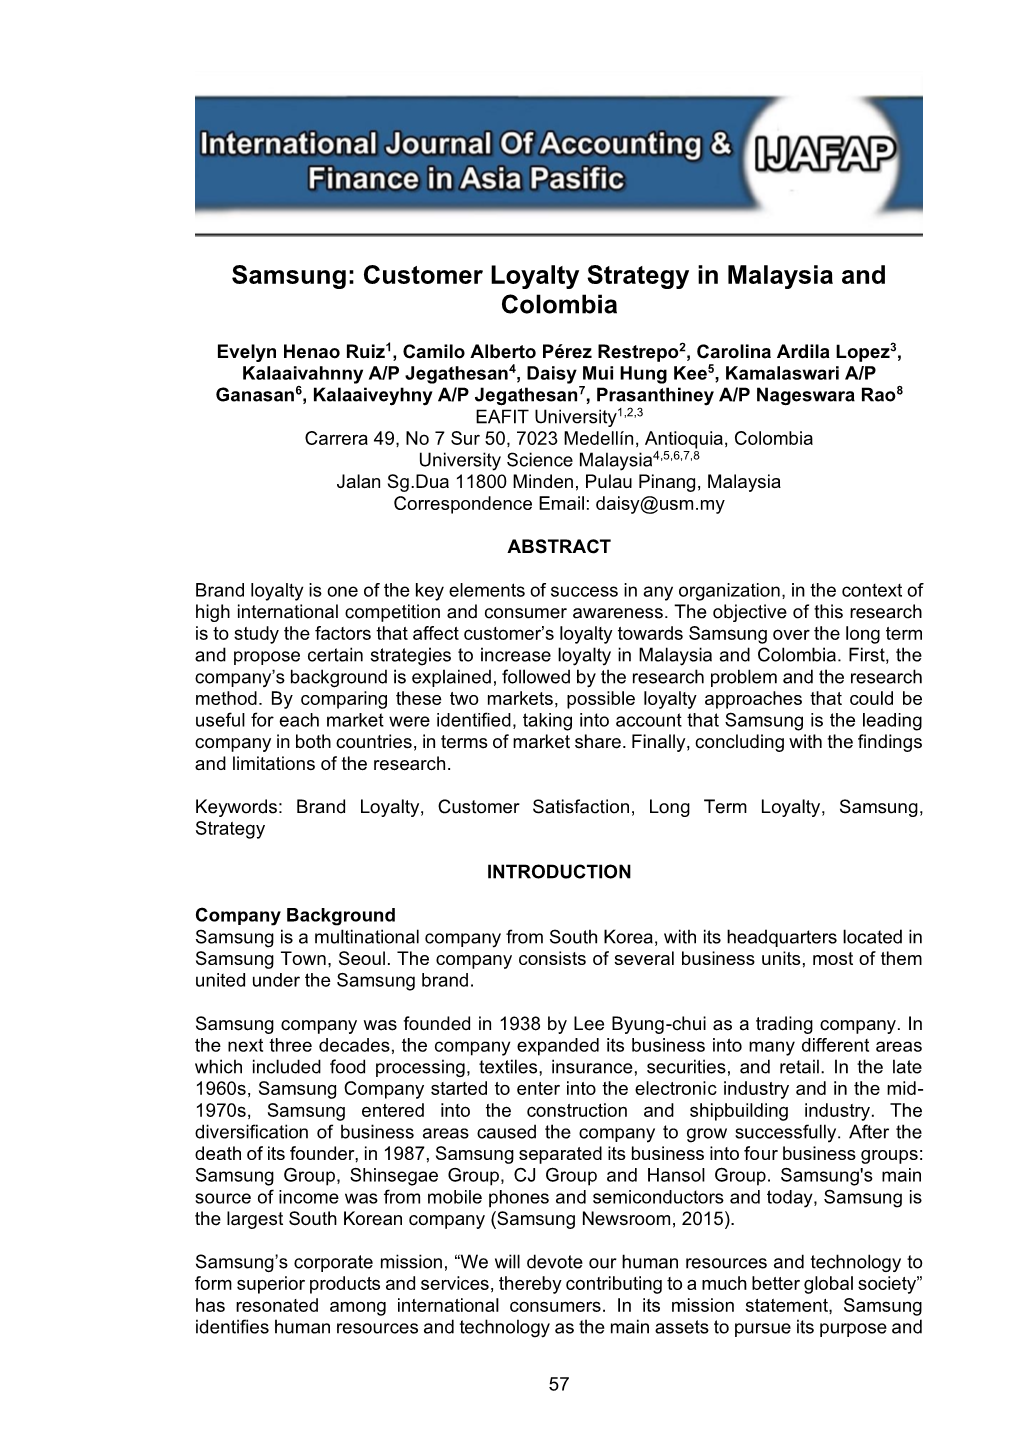 Samsung: Customer Loyalty Strategy in Malaysia and Colombia